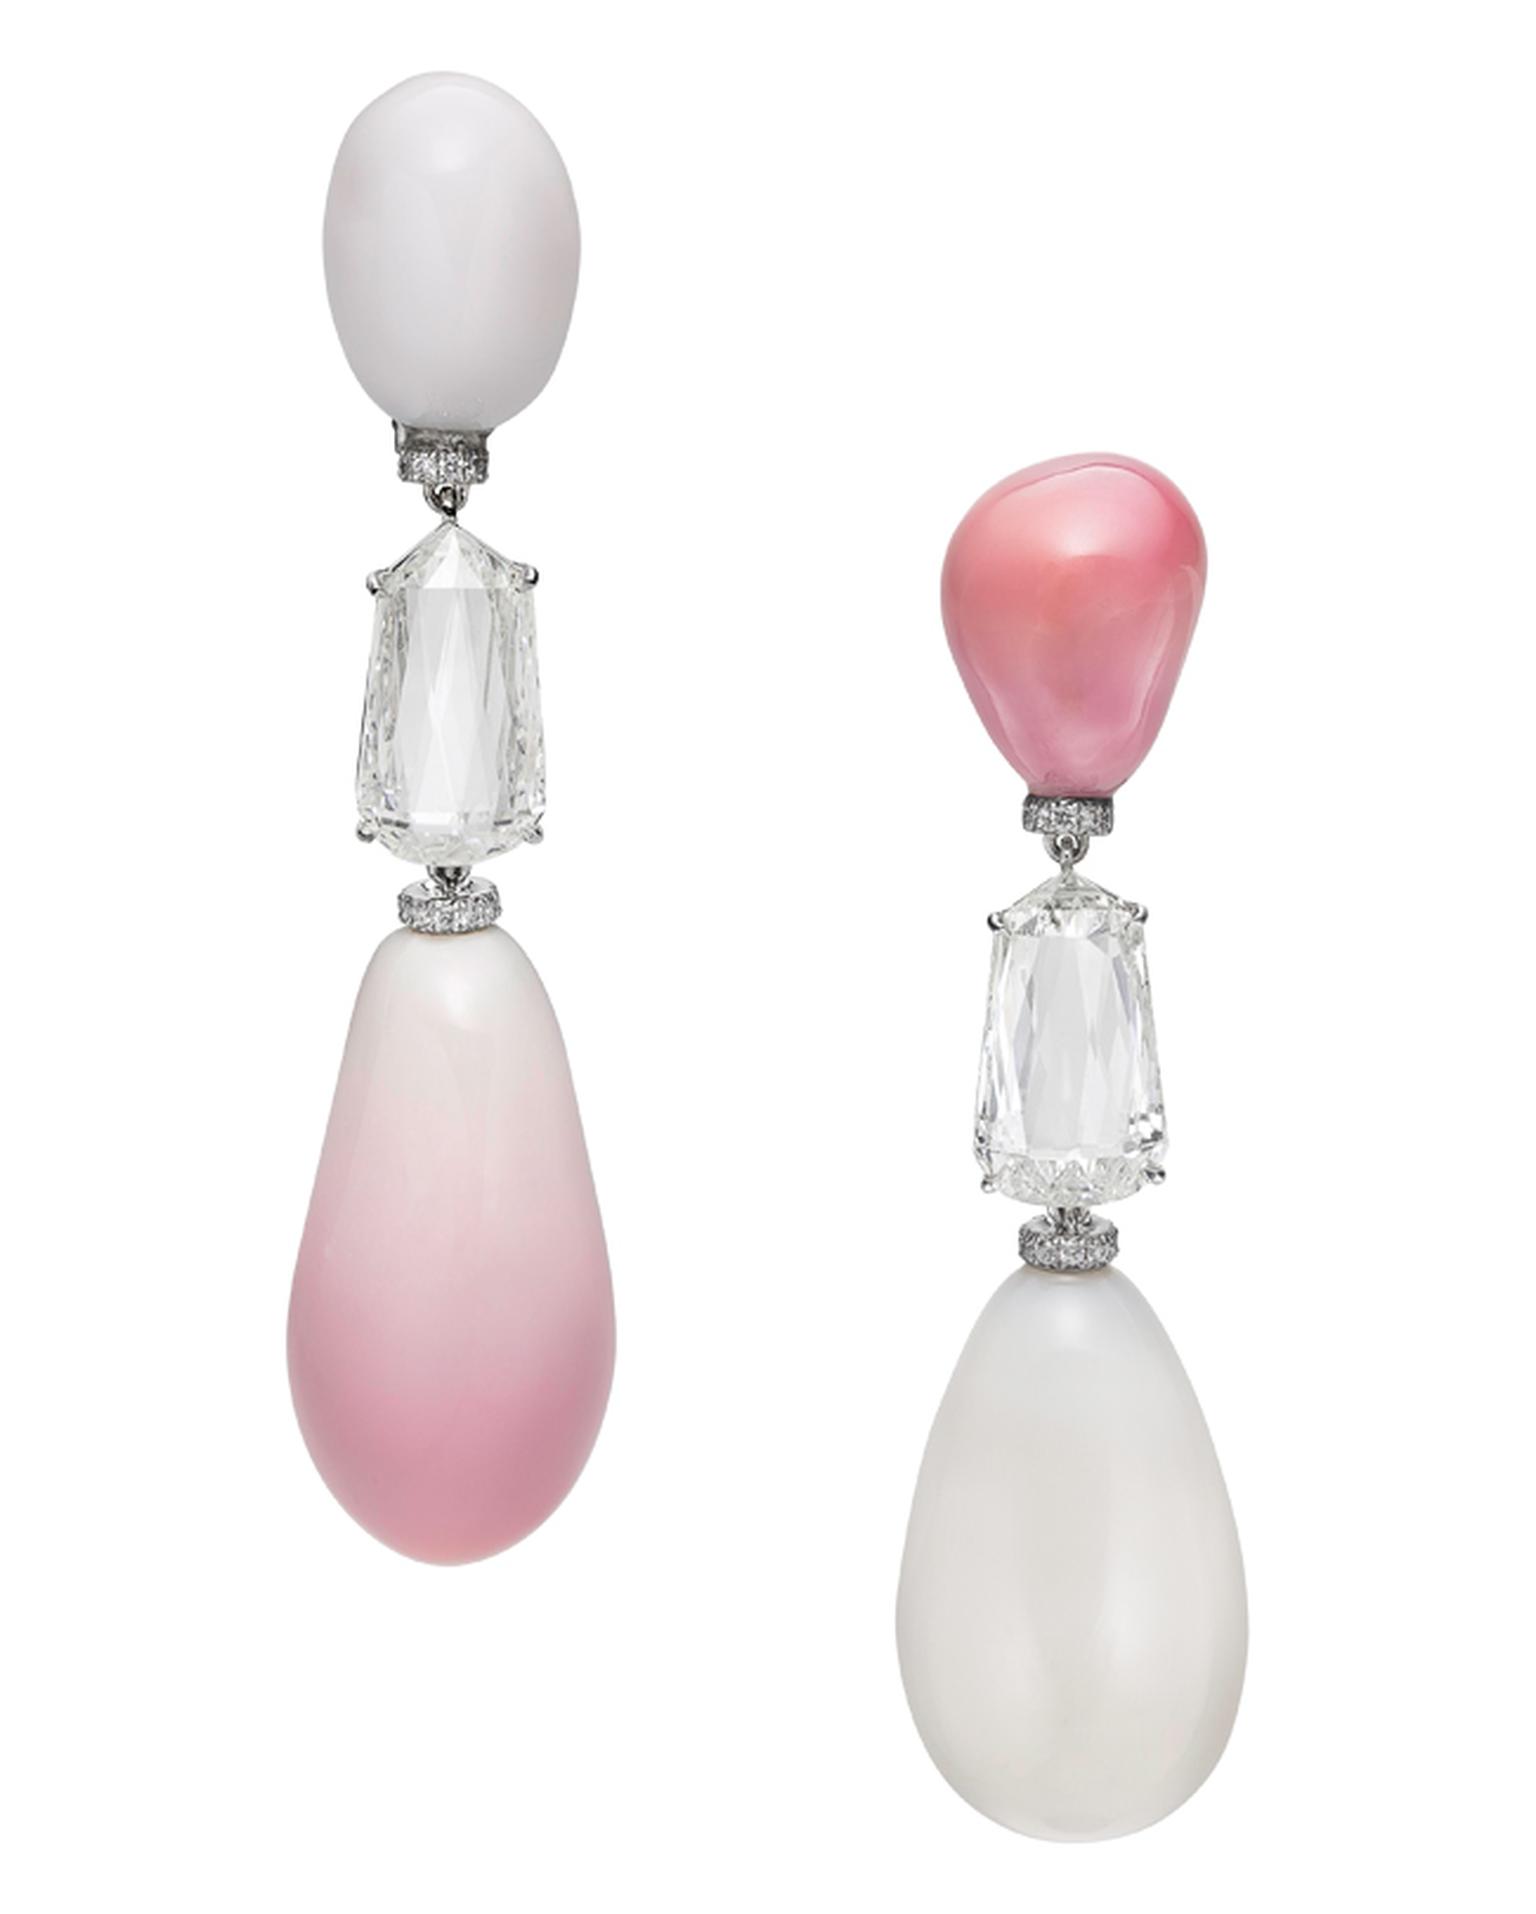 Bogh-Art-natural-saltwater-conch-and-clam-pearl-earrings-with-diamonds_20140312_Main